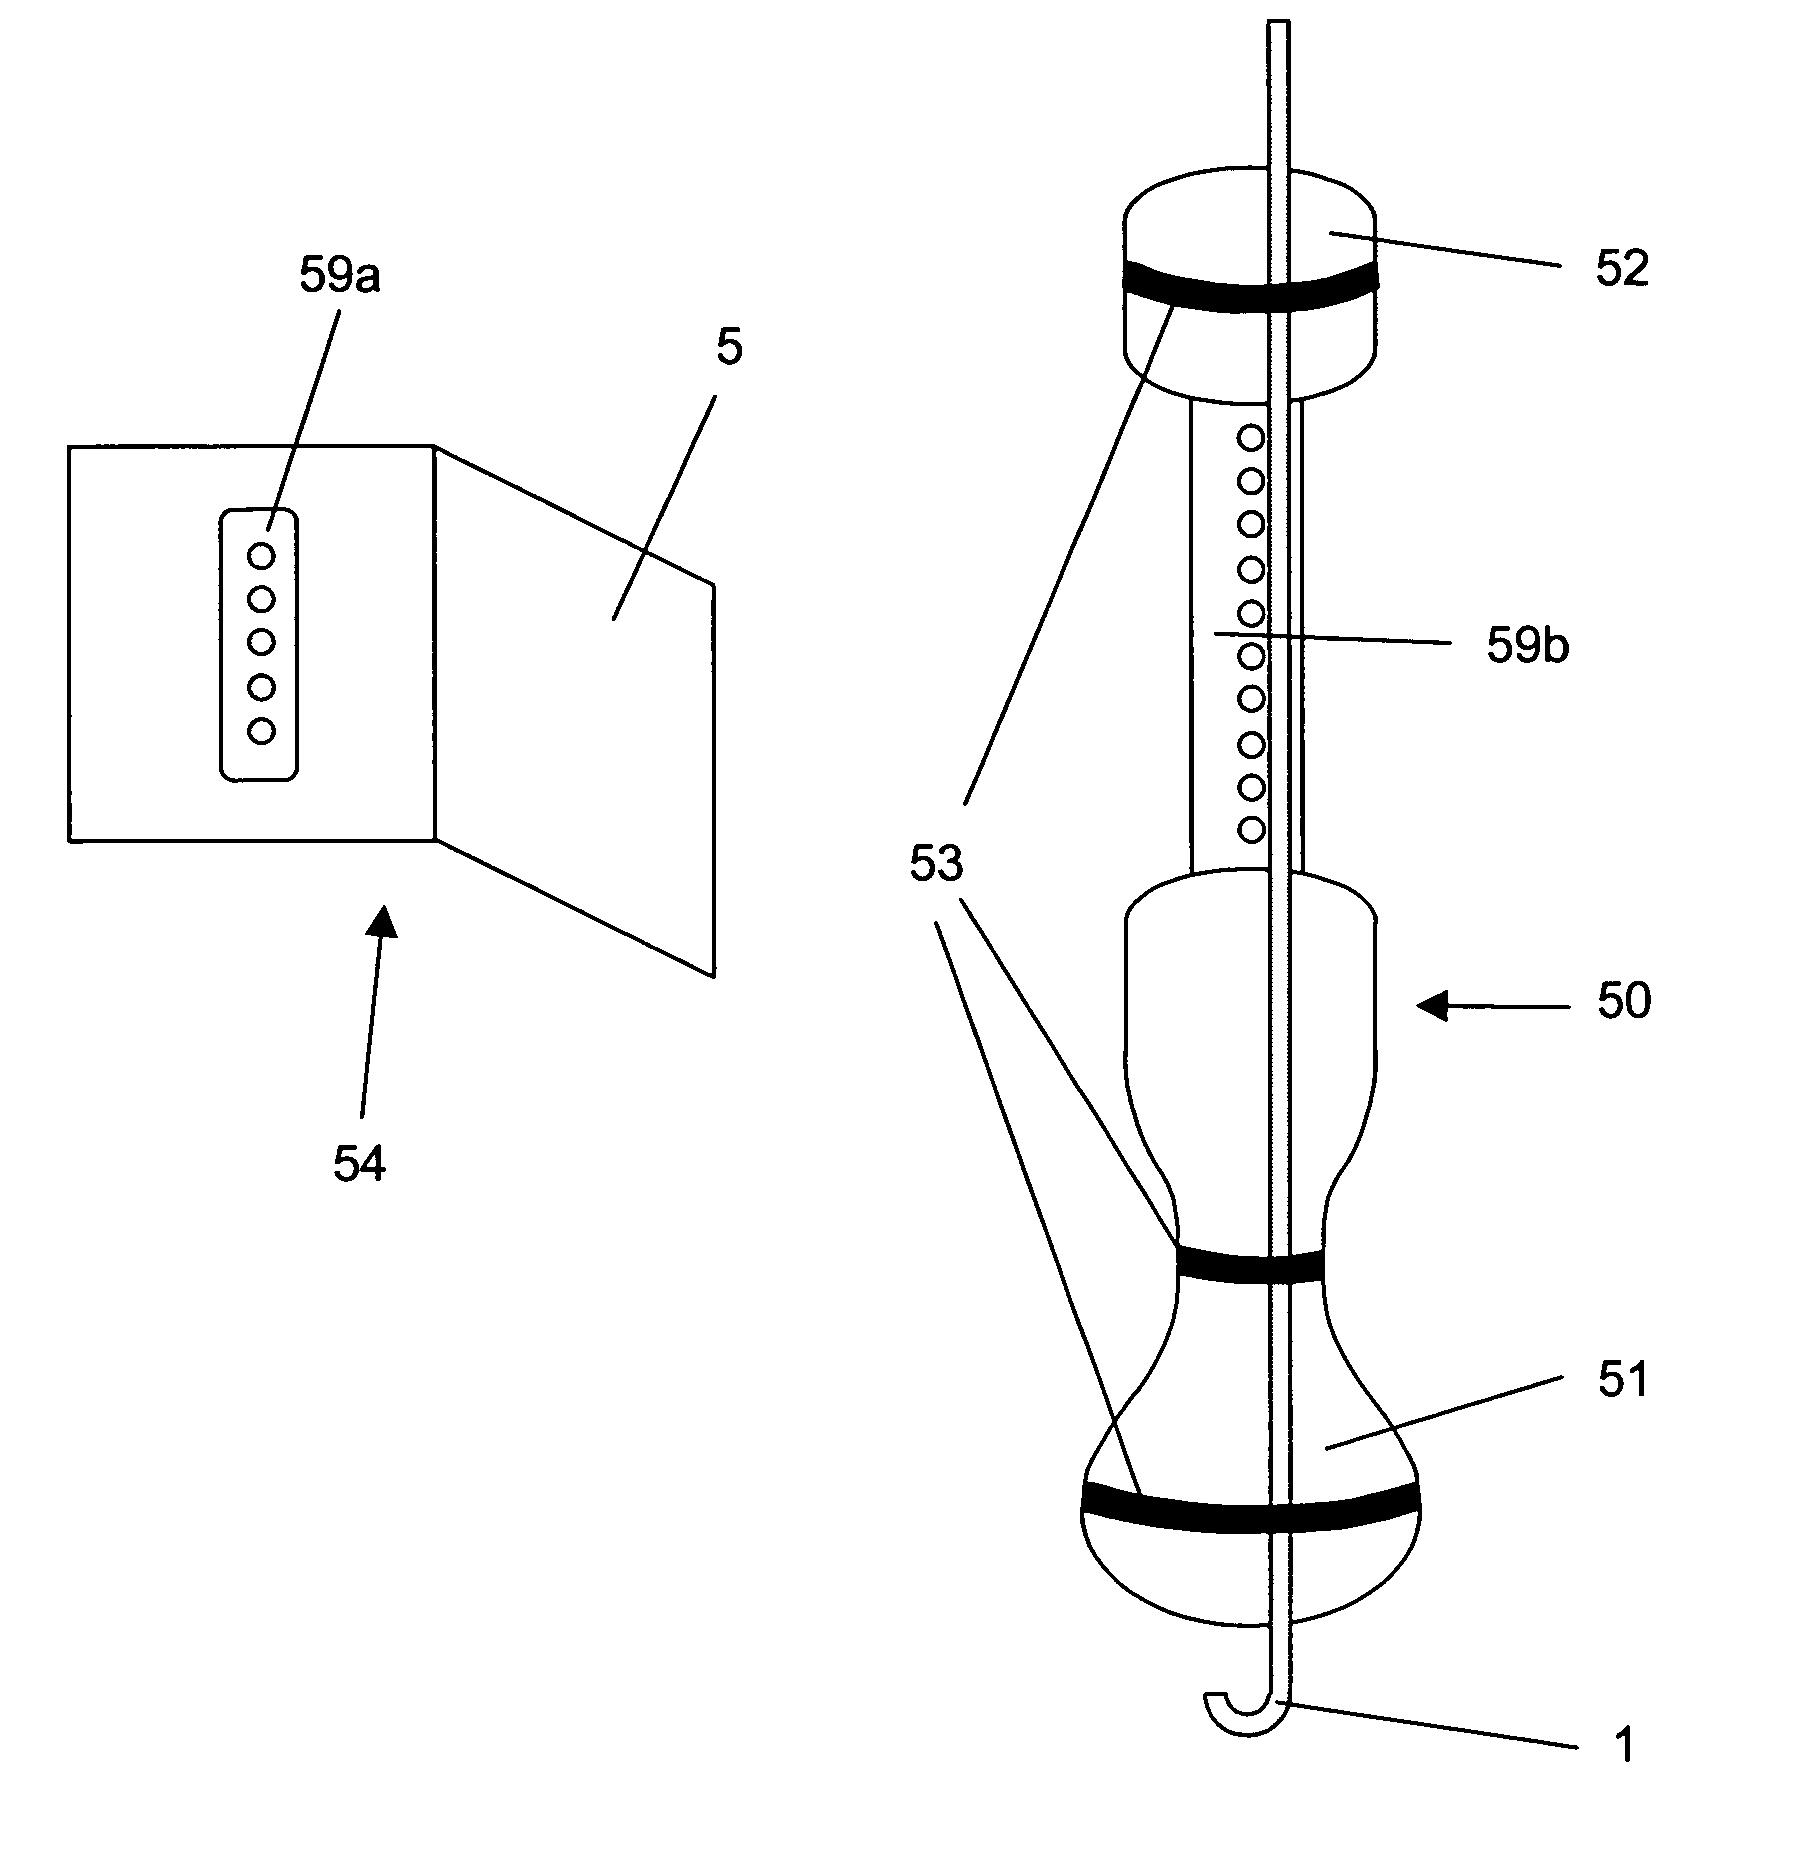 Apparatus for holding nasal tubes